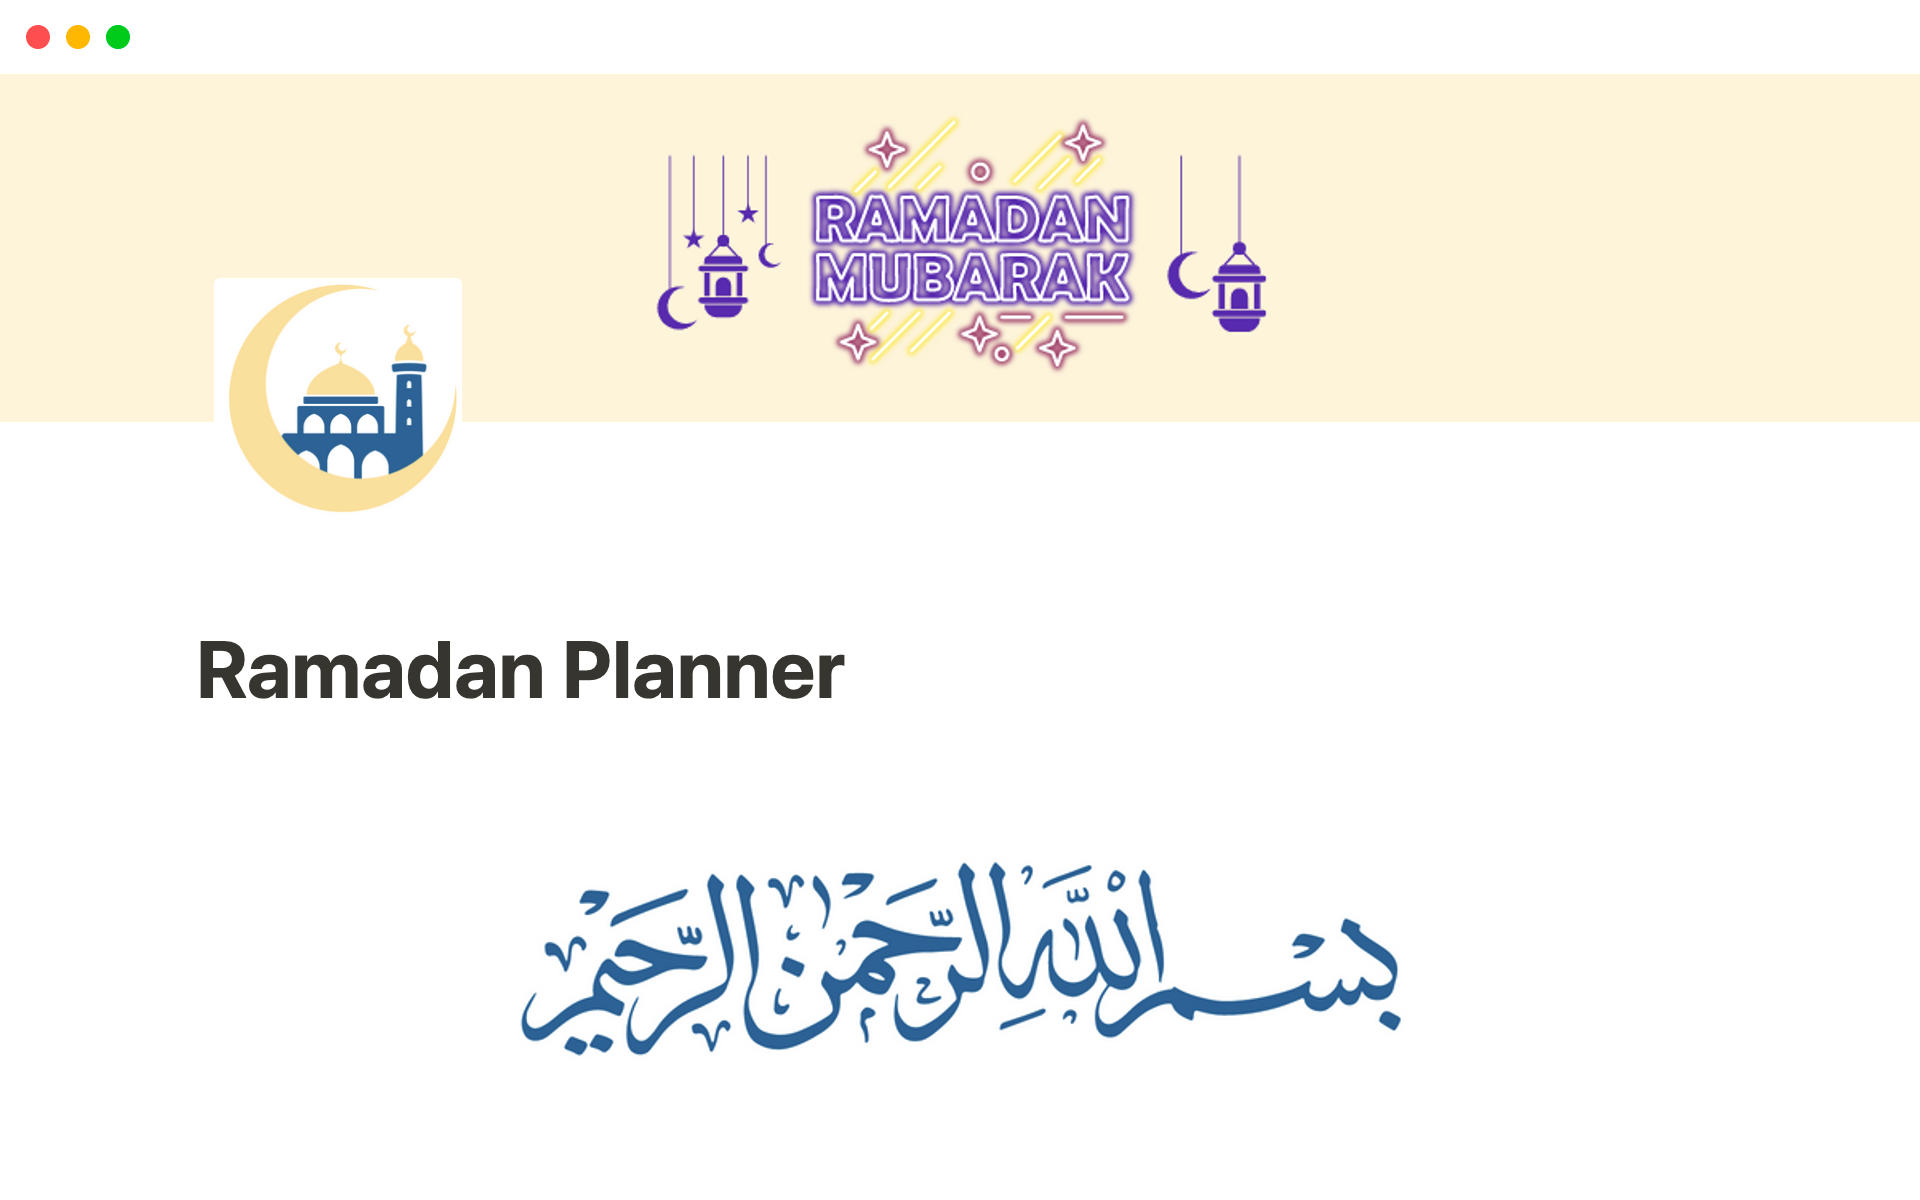 The Ramadan Planner helps you organize this blessed month of Ramadan and track all your Ramadan activities effortlessly.